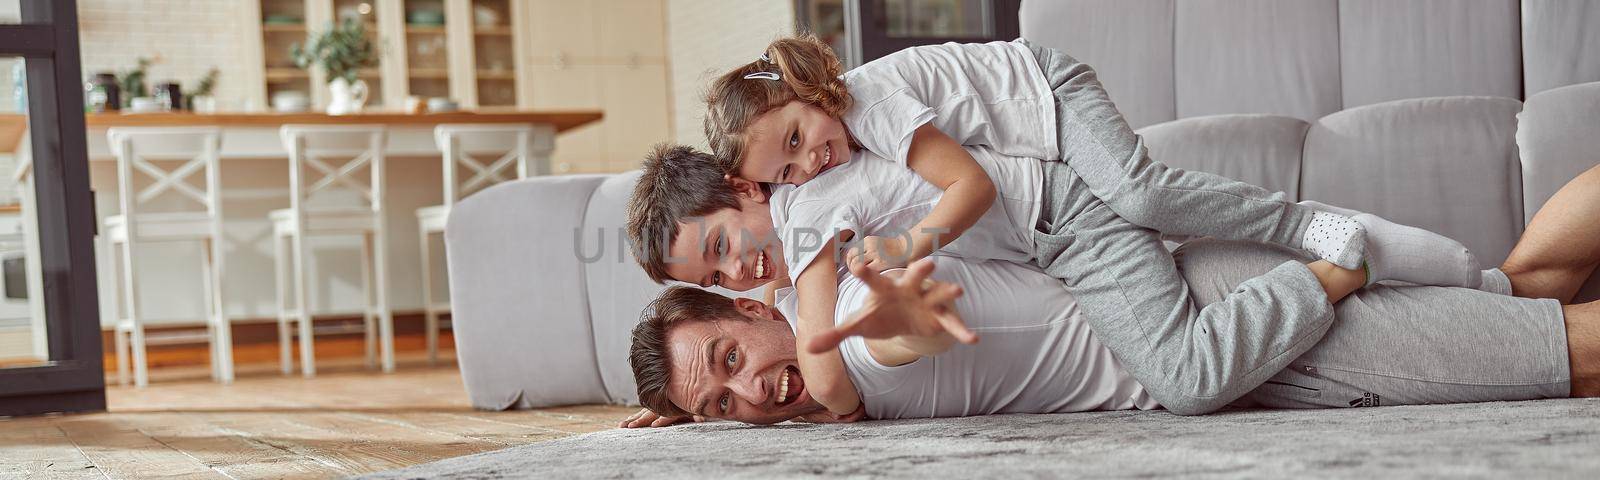 Funny dad with kids on back in living room by Yaroslav_astakhov